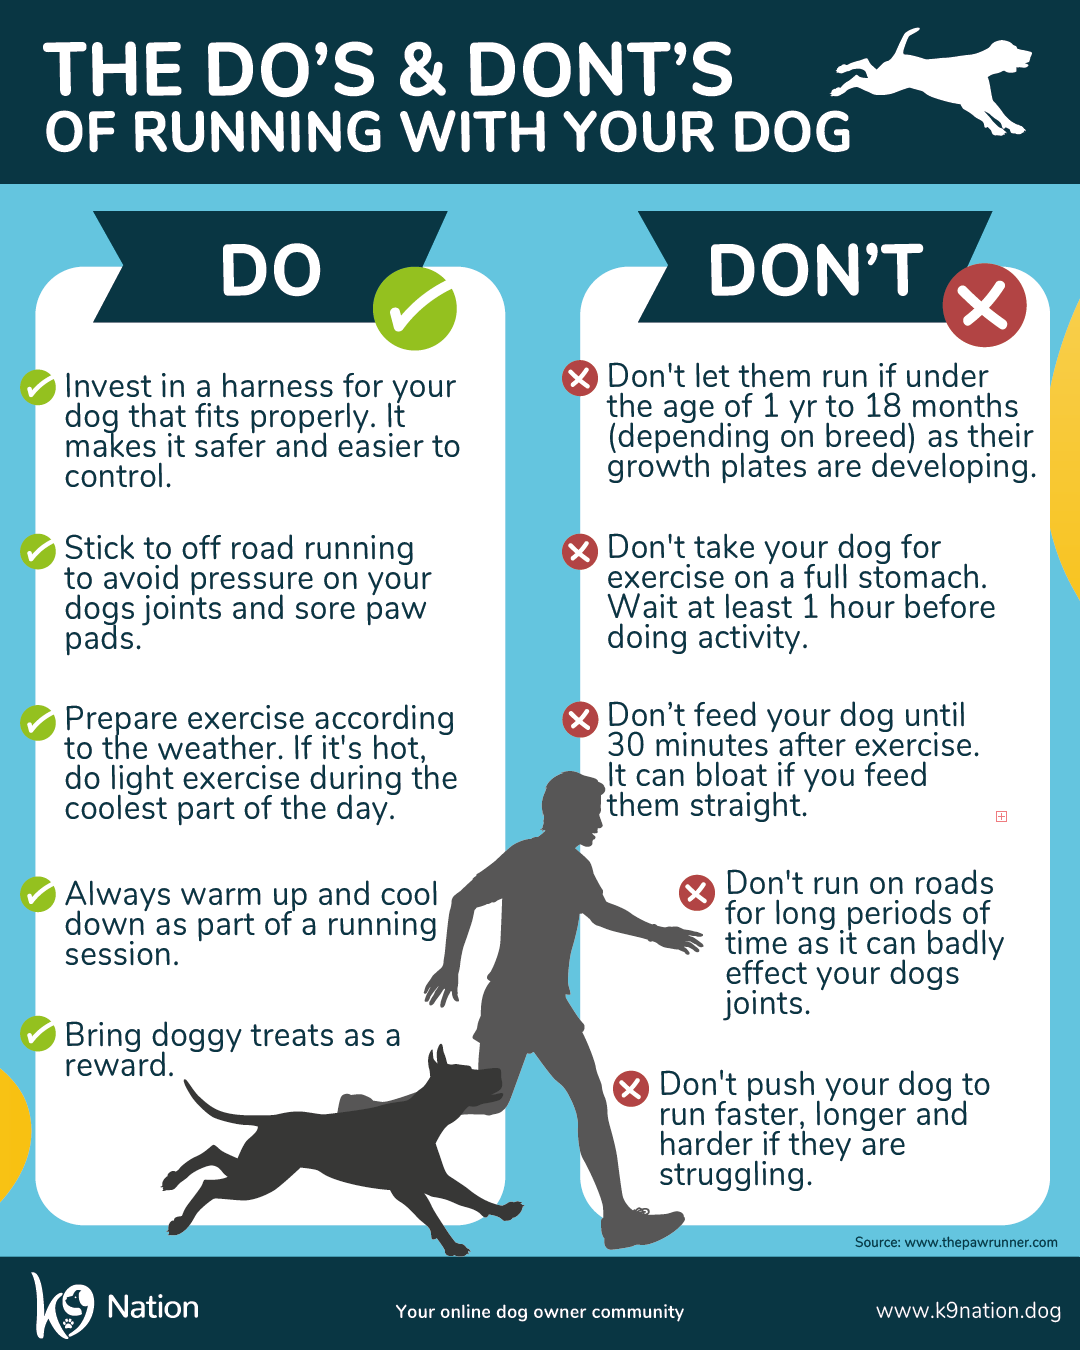 Running with your dog - Info 1